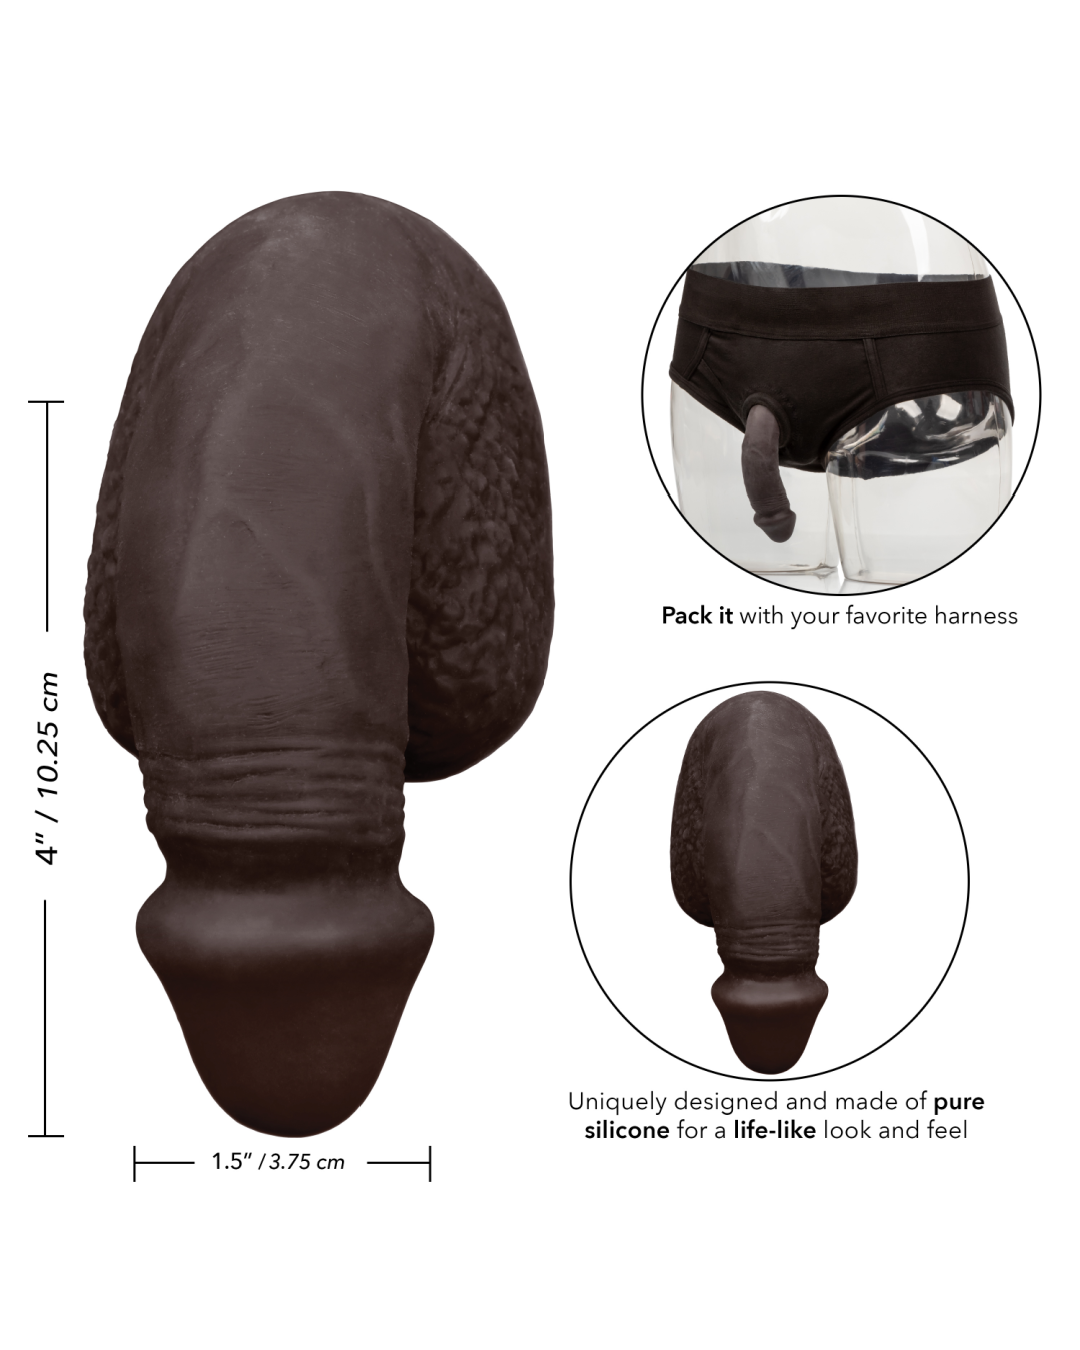 Packer Gear Silicone Packing Penis 4 Inch - Chocolate